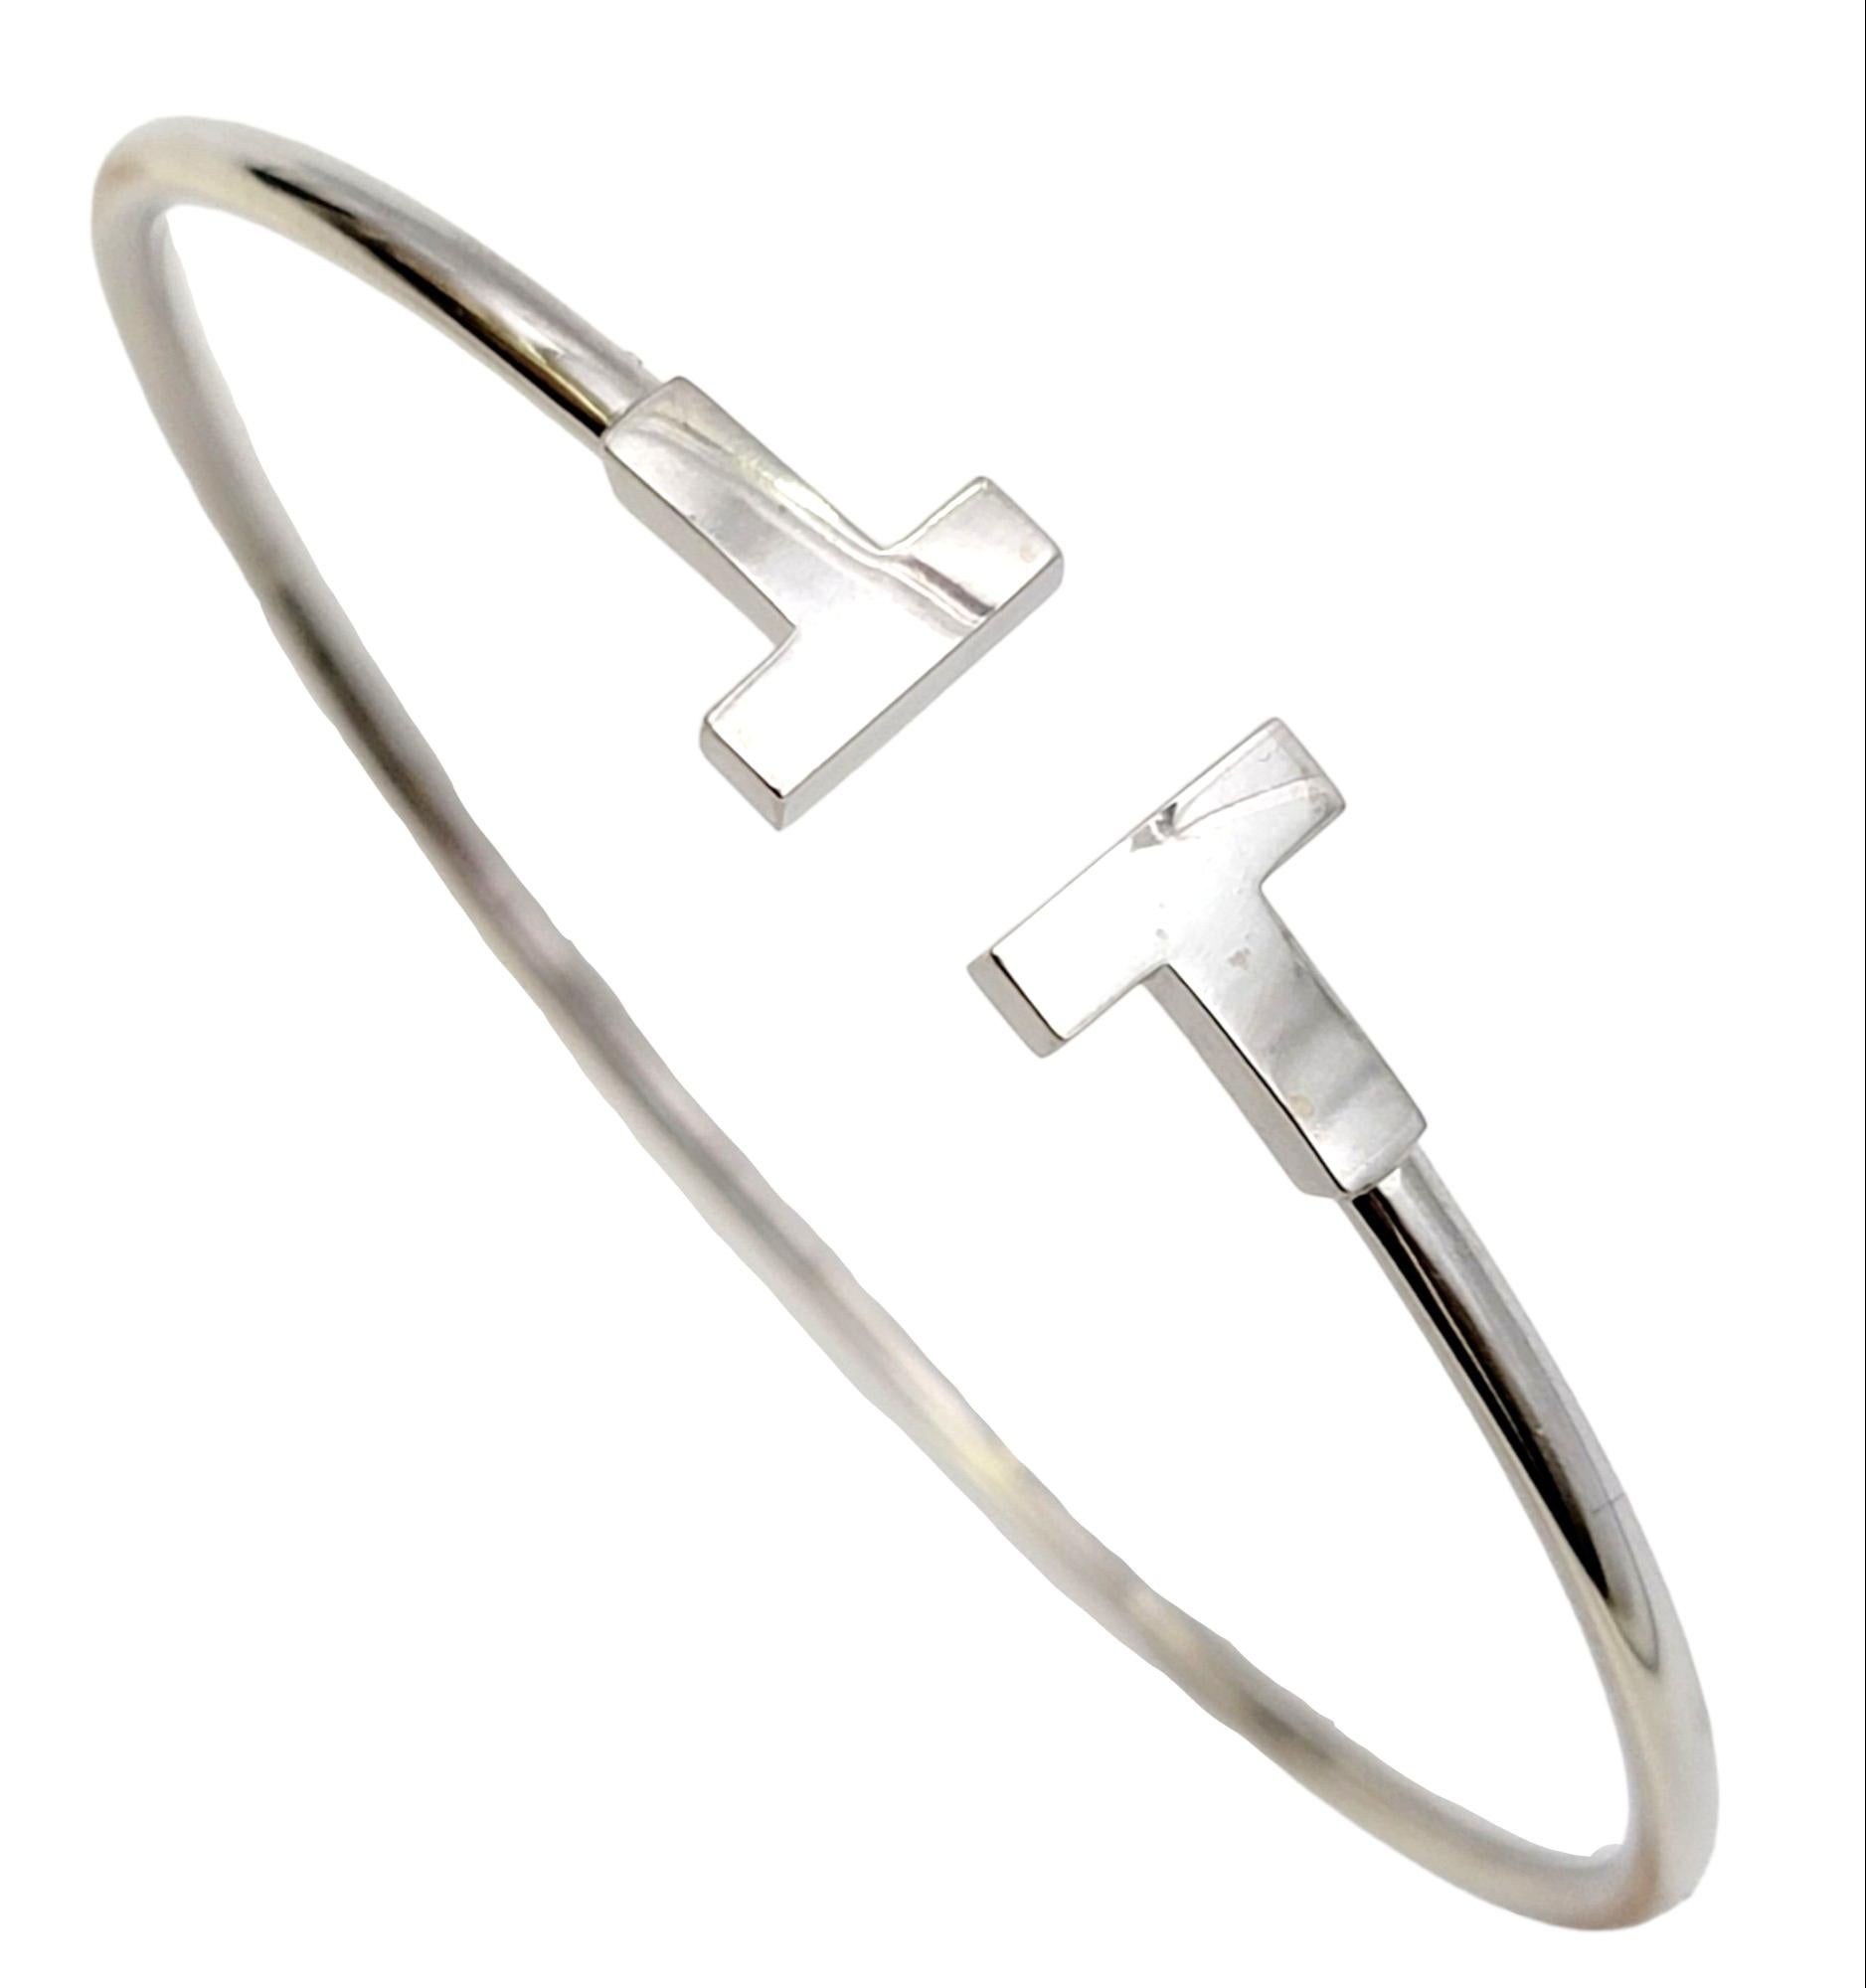 Contemporary elegance is at its finest with this sleek and stunning Tiffany & Co. wire bracelet. Founded in 1837 in New York City, Tiffany & Co. is one of the world's most storied luxury design houses recognized globally for its innovative jewelry